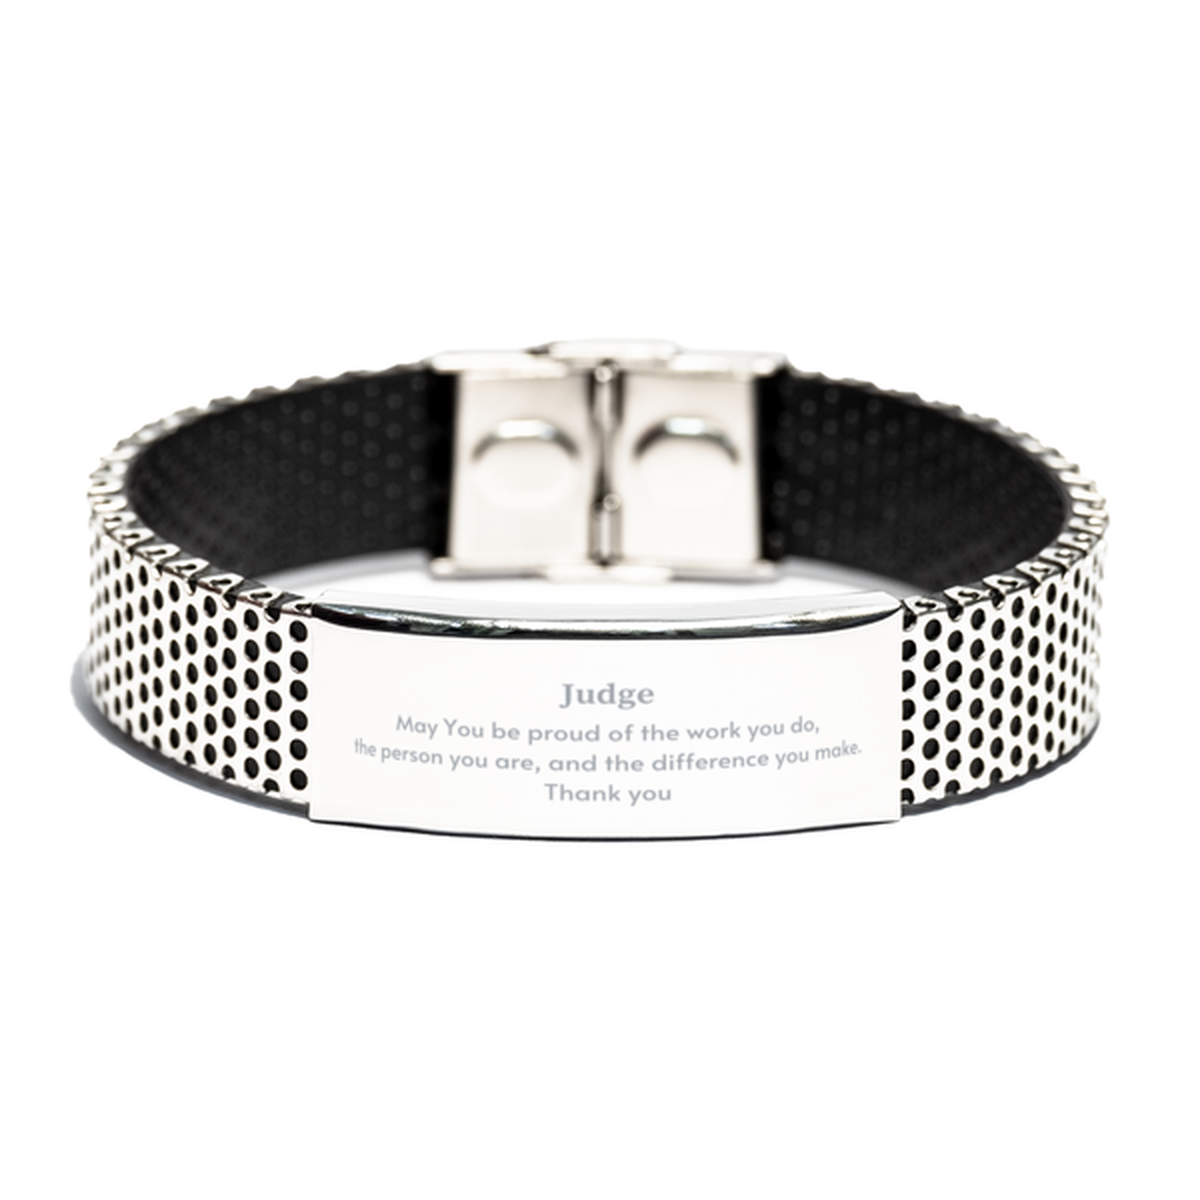 Heartwarming Stainless Steel Bracelet Retirement Coworkers Gifts for Judge, Judge May You be proud of the work you do, the person you are Gifts for Boss Men Women Friends